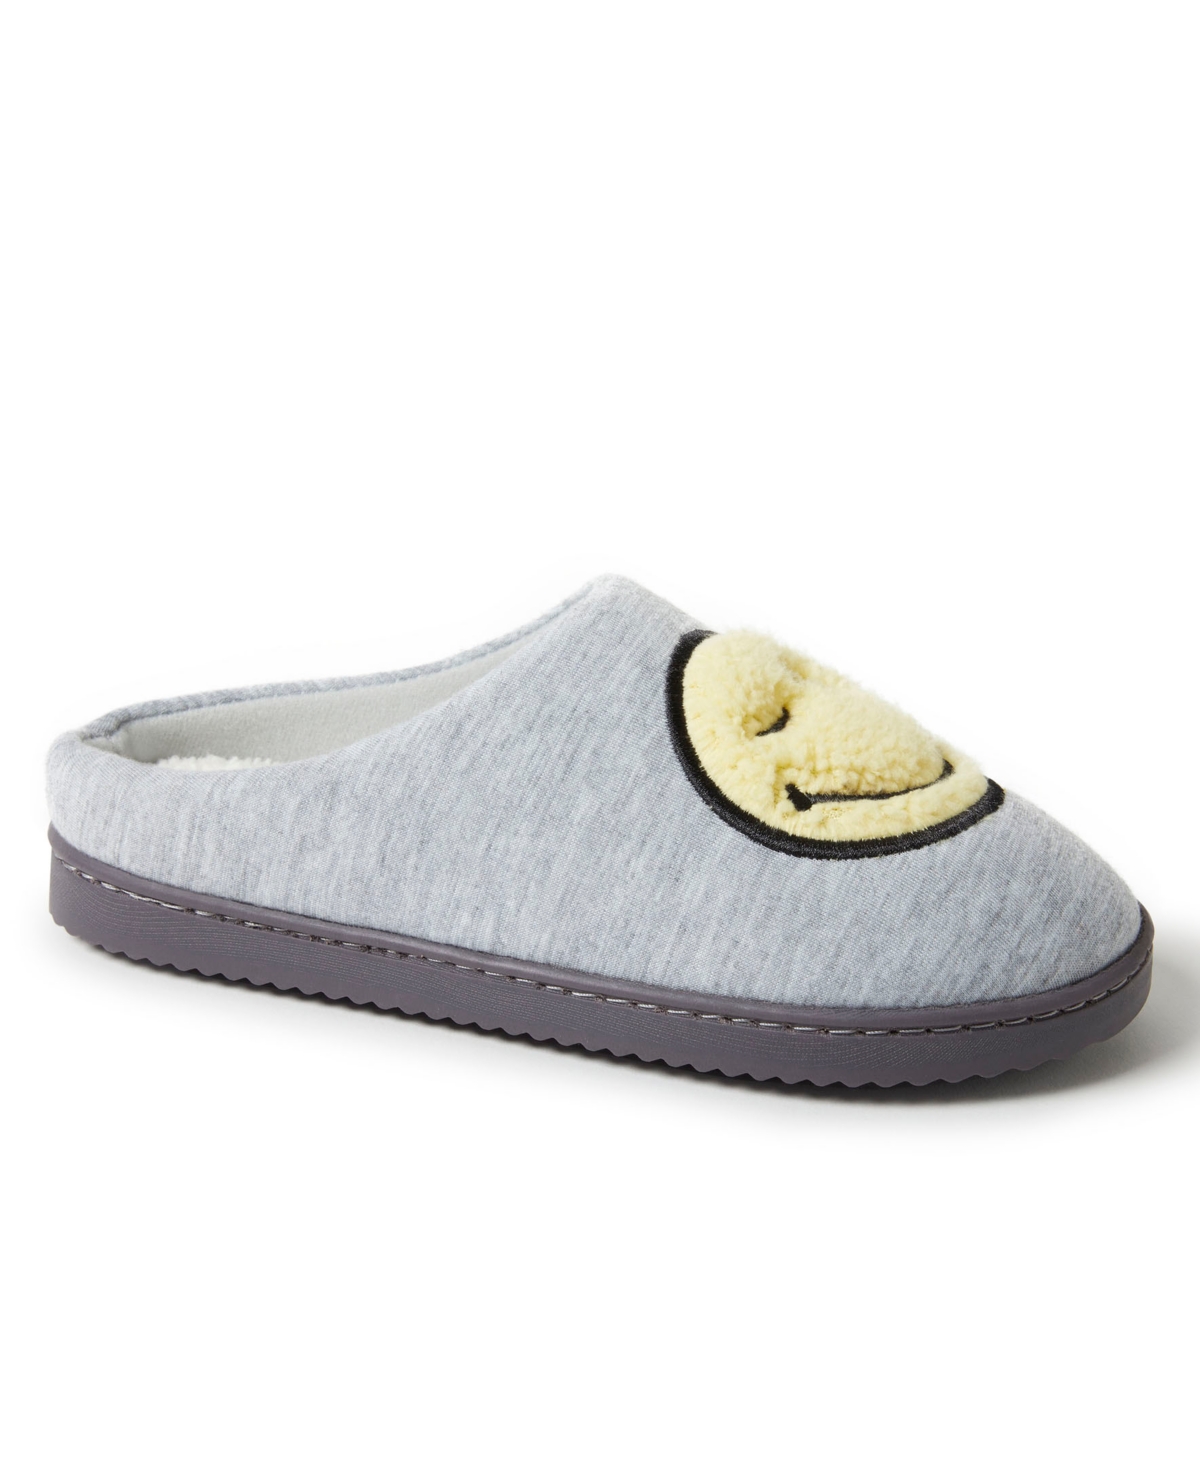 Women's Smile Icon Slippers - Oatmeal Heather